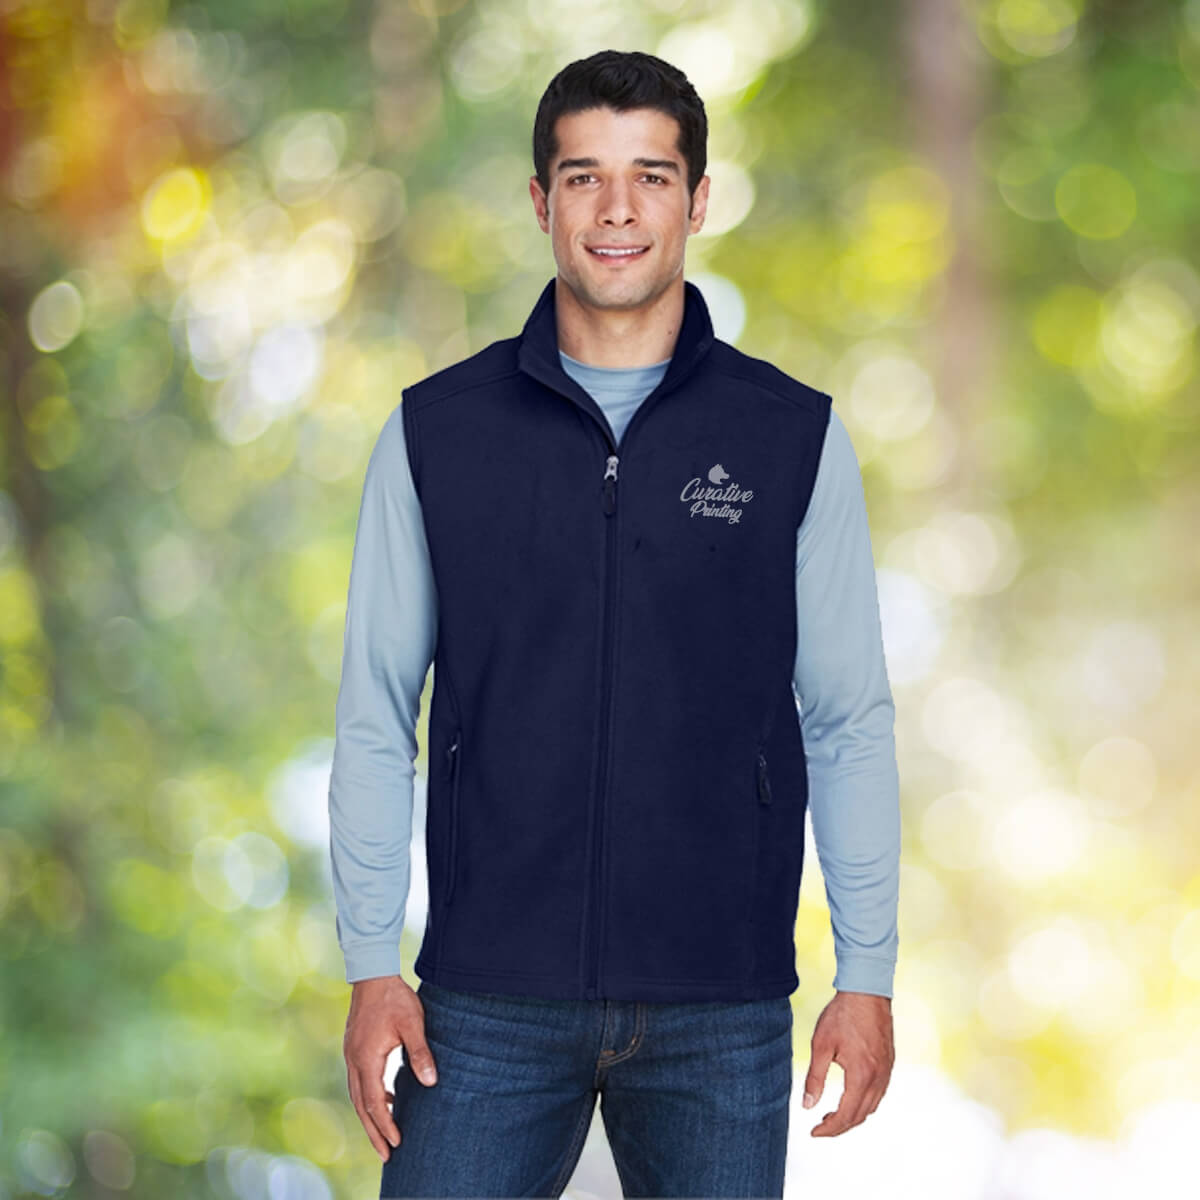 Man outdoors wearing navy vest outerwear apparel with white curative printing logo imprint